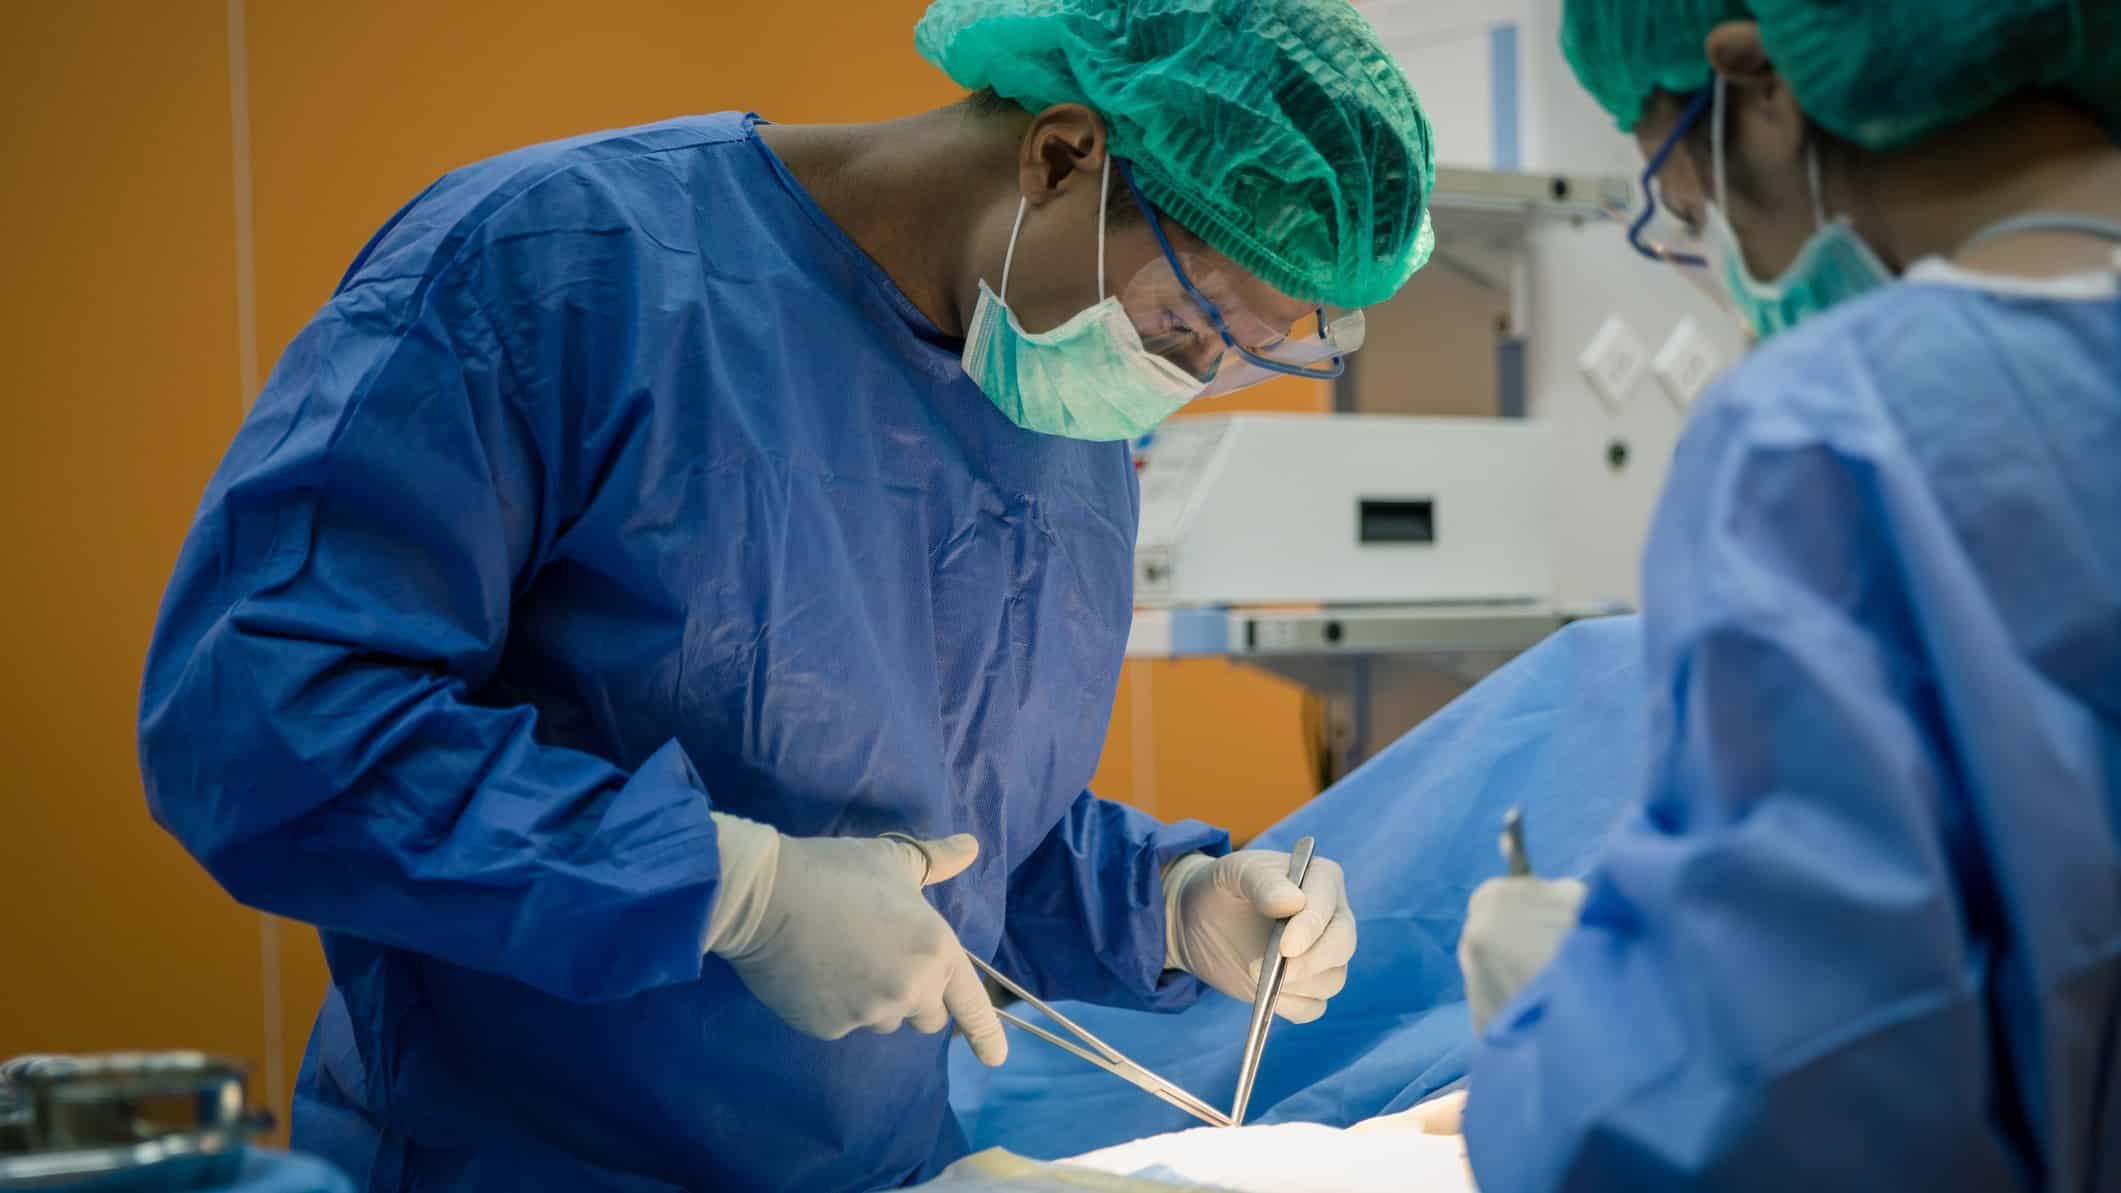 medical doctor performing surgery using surgical instruments